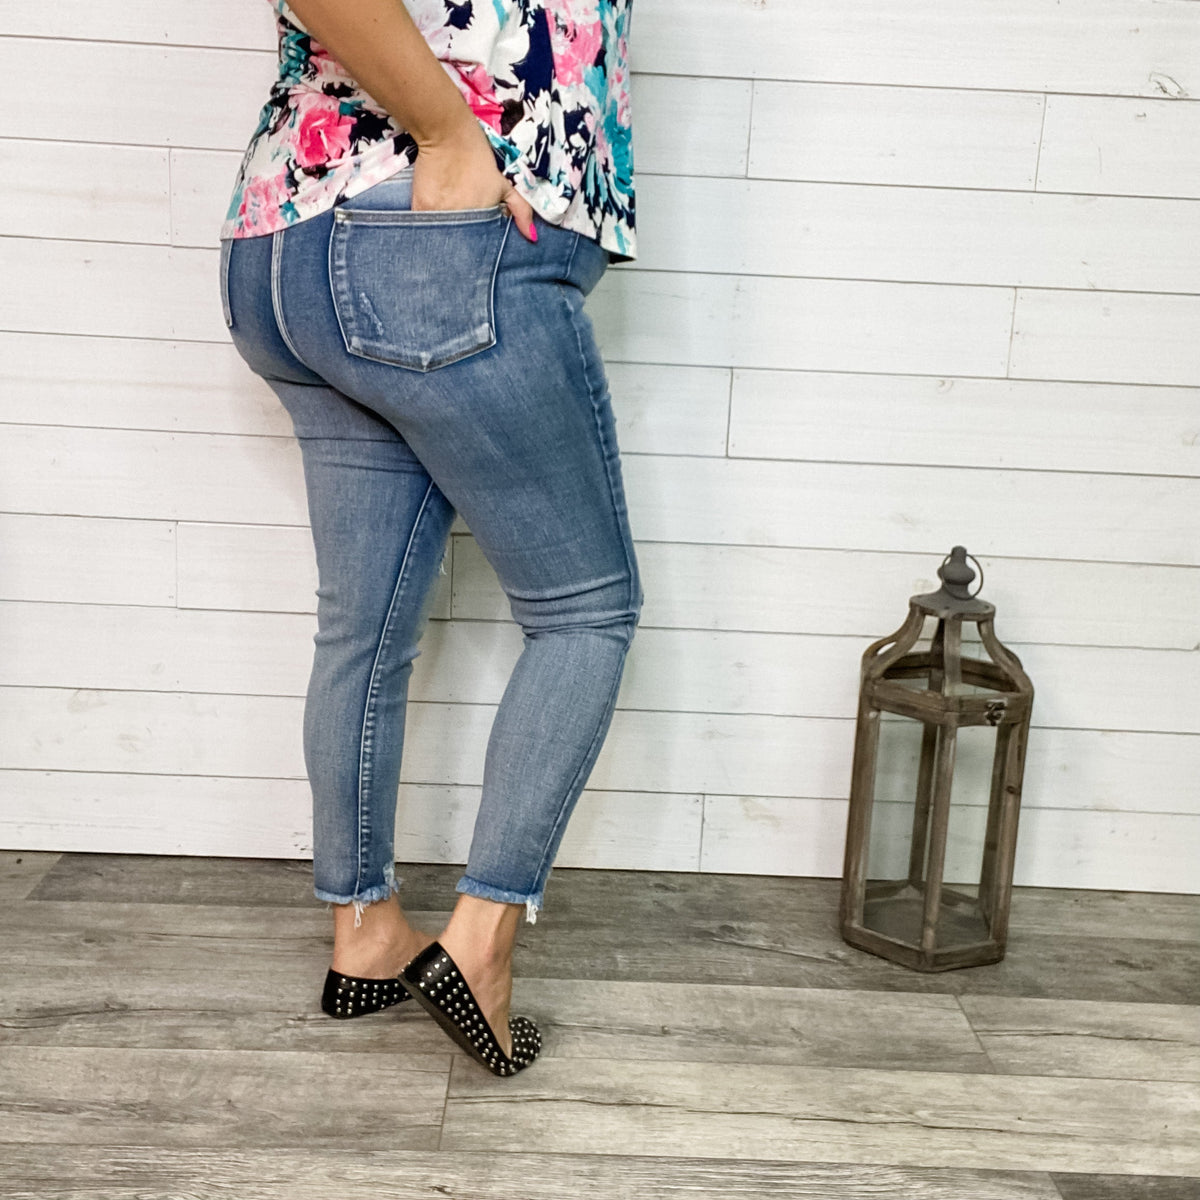 Judy Blue "Hold My Phone" Buttonfly Skinny jeans-Lola Monroe Boutique